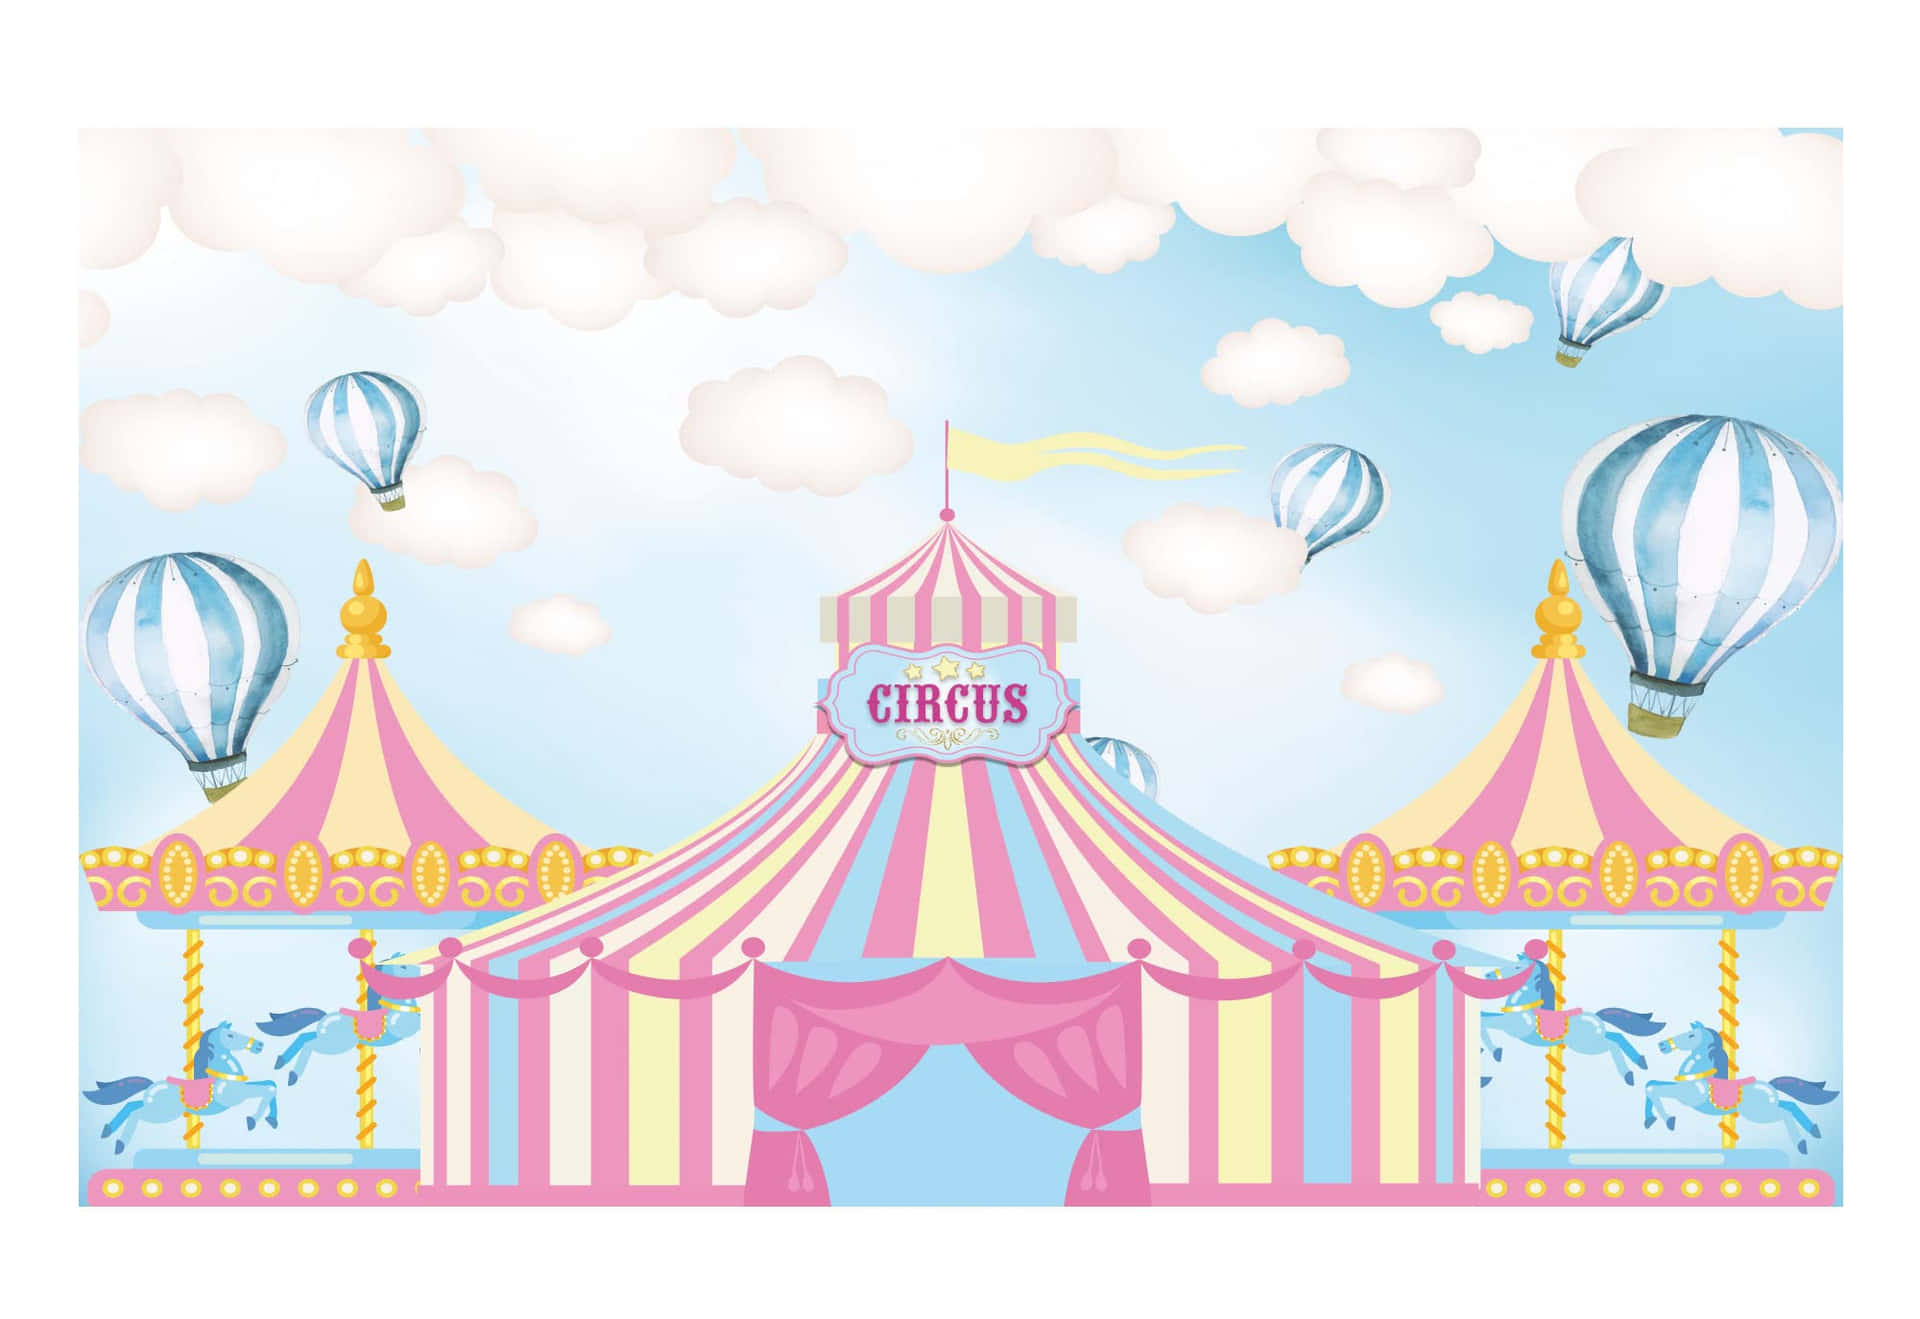 Step Right Up for the Greatest Circus Show on Earth!